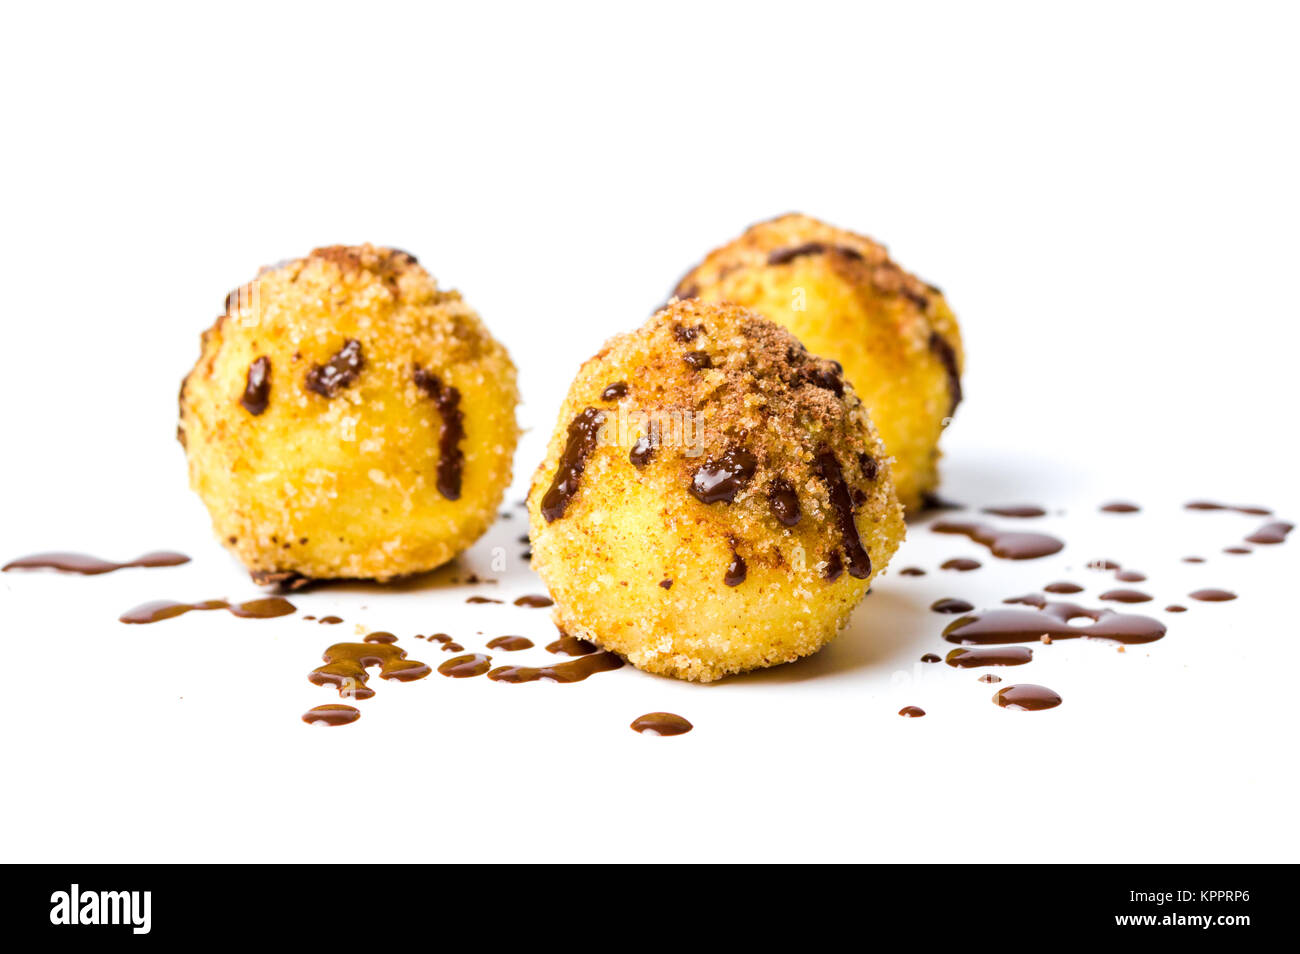 Bread crumb dumplings stuffed with chocolate and nuts isolated Stock Photo